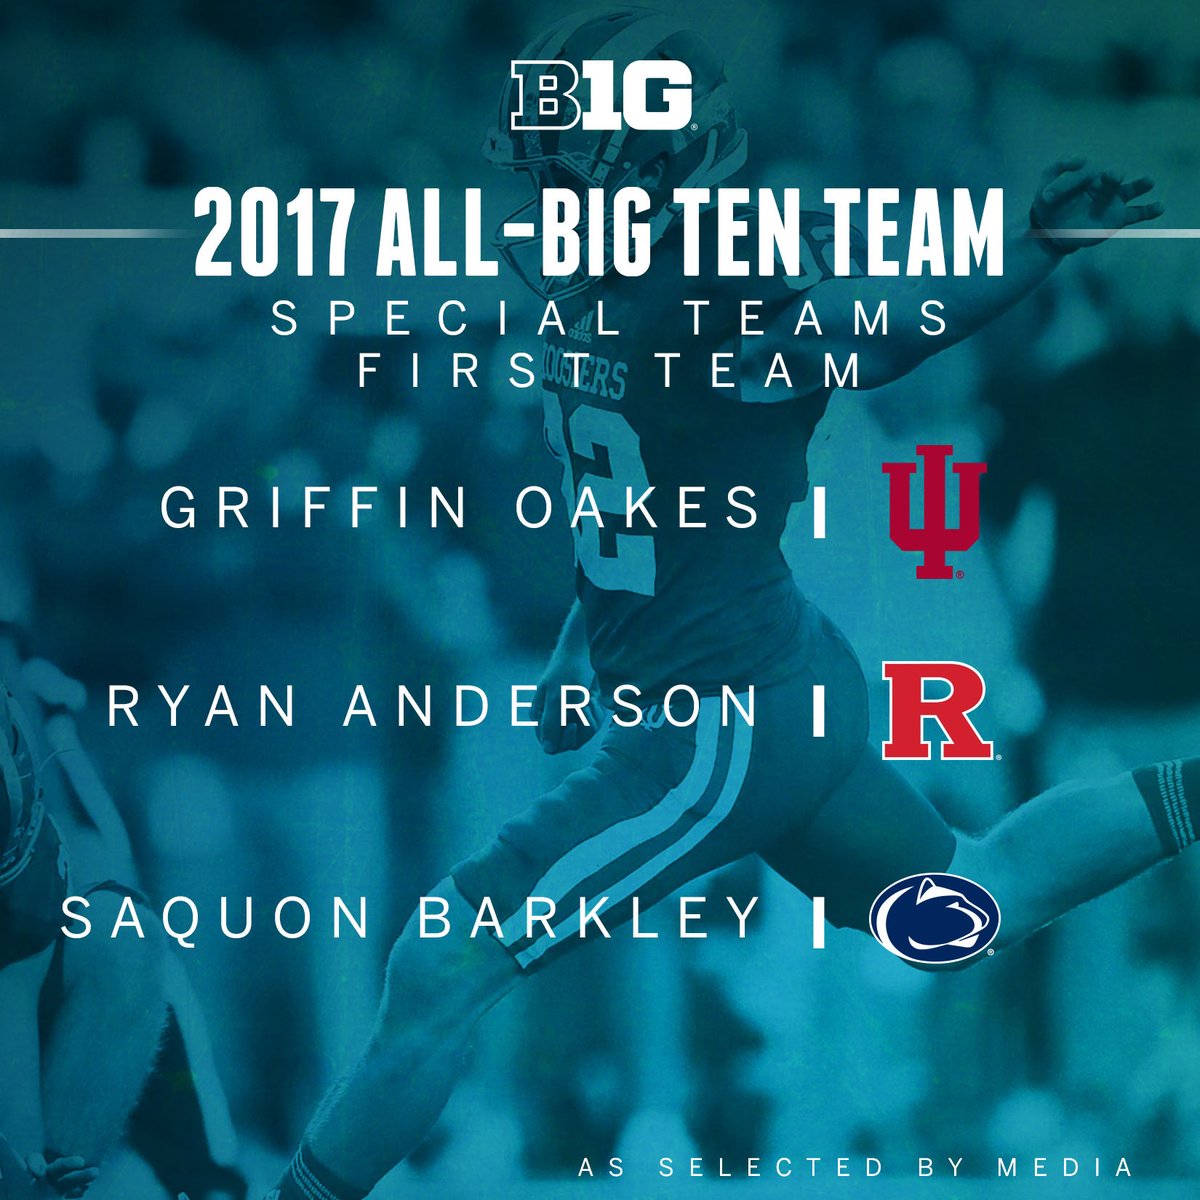 All-Big Ten Special Teams First Team, as selected by media